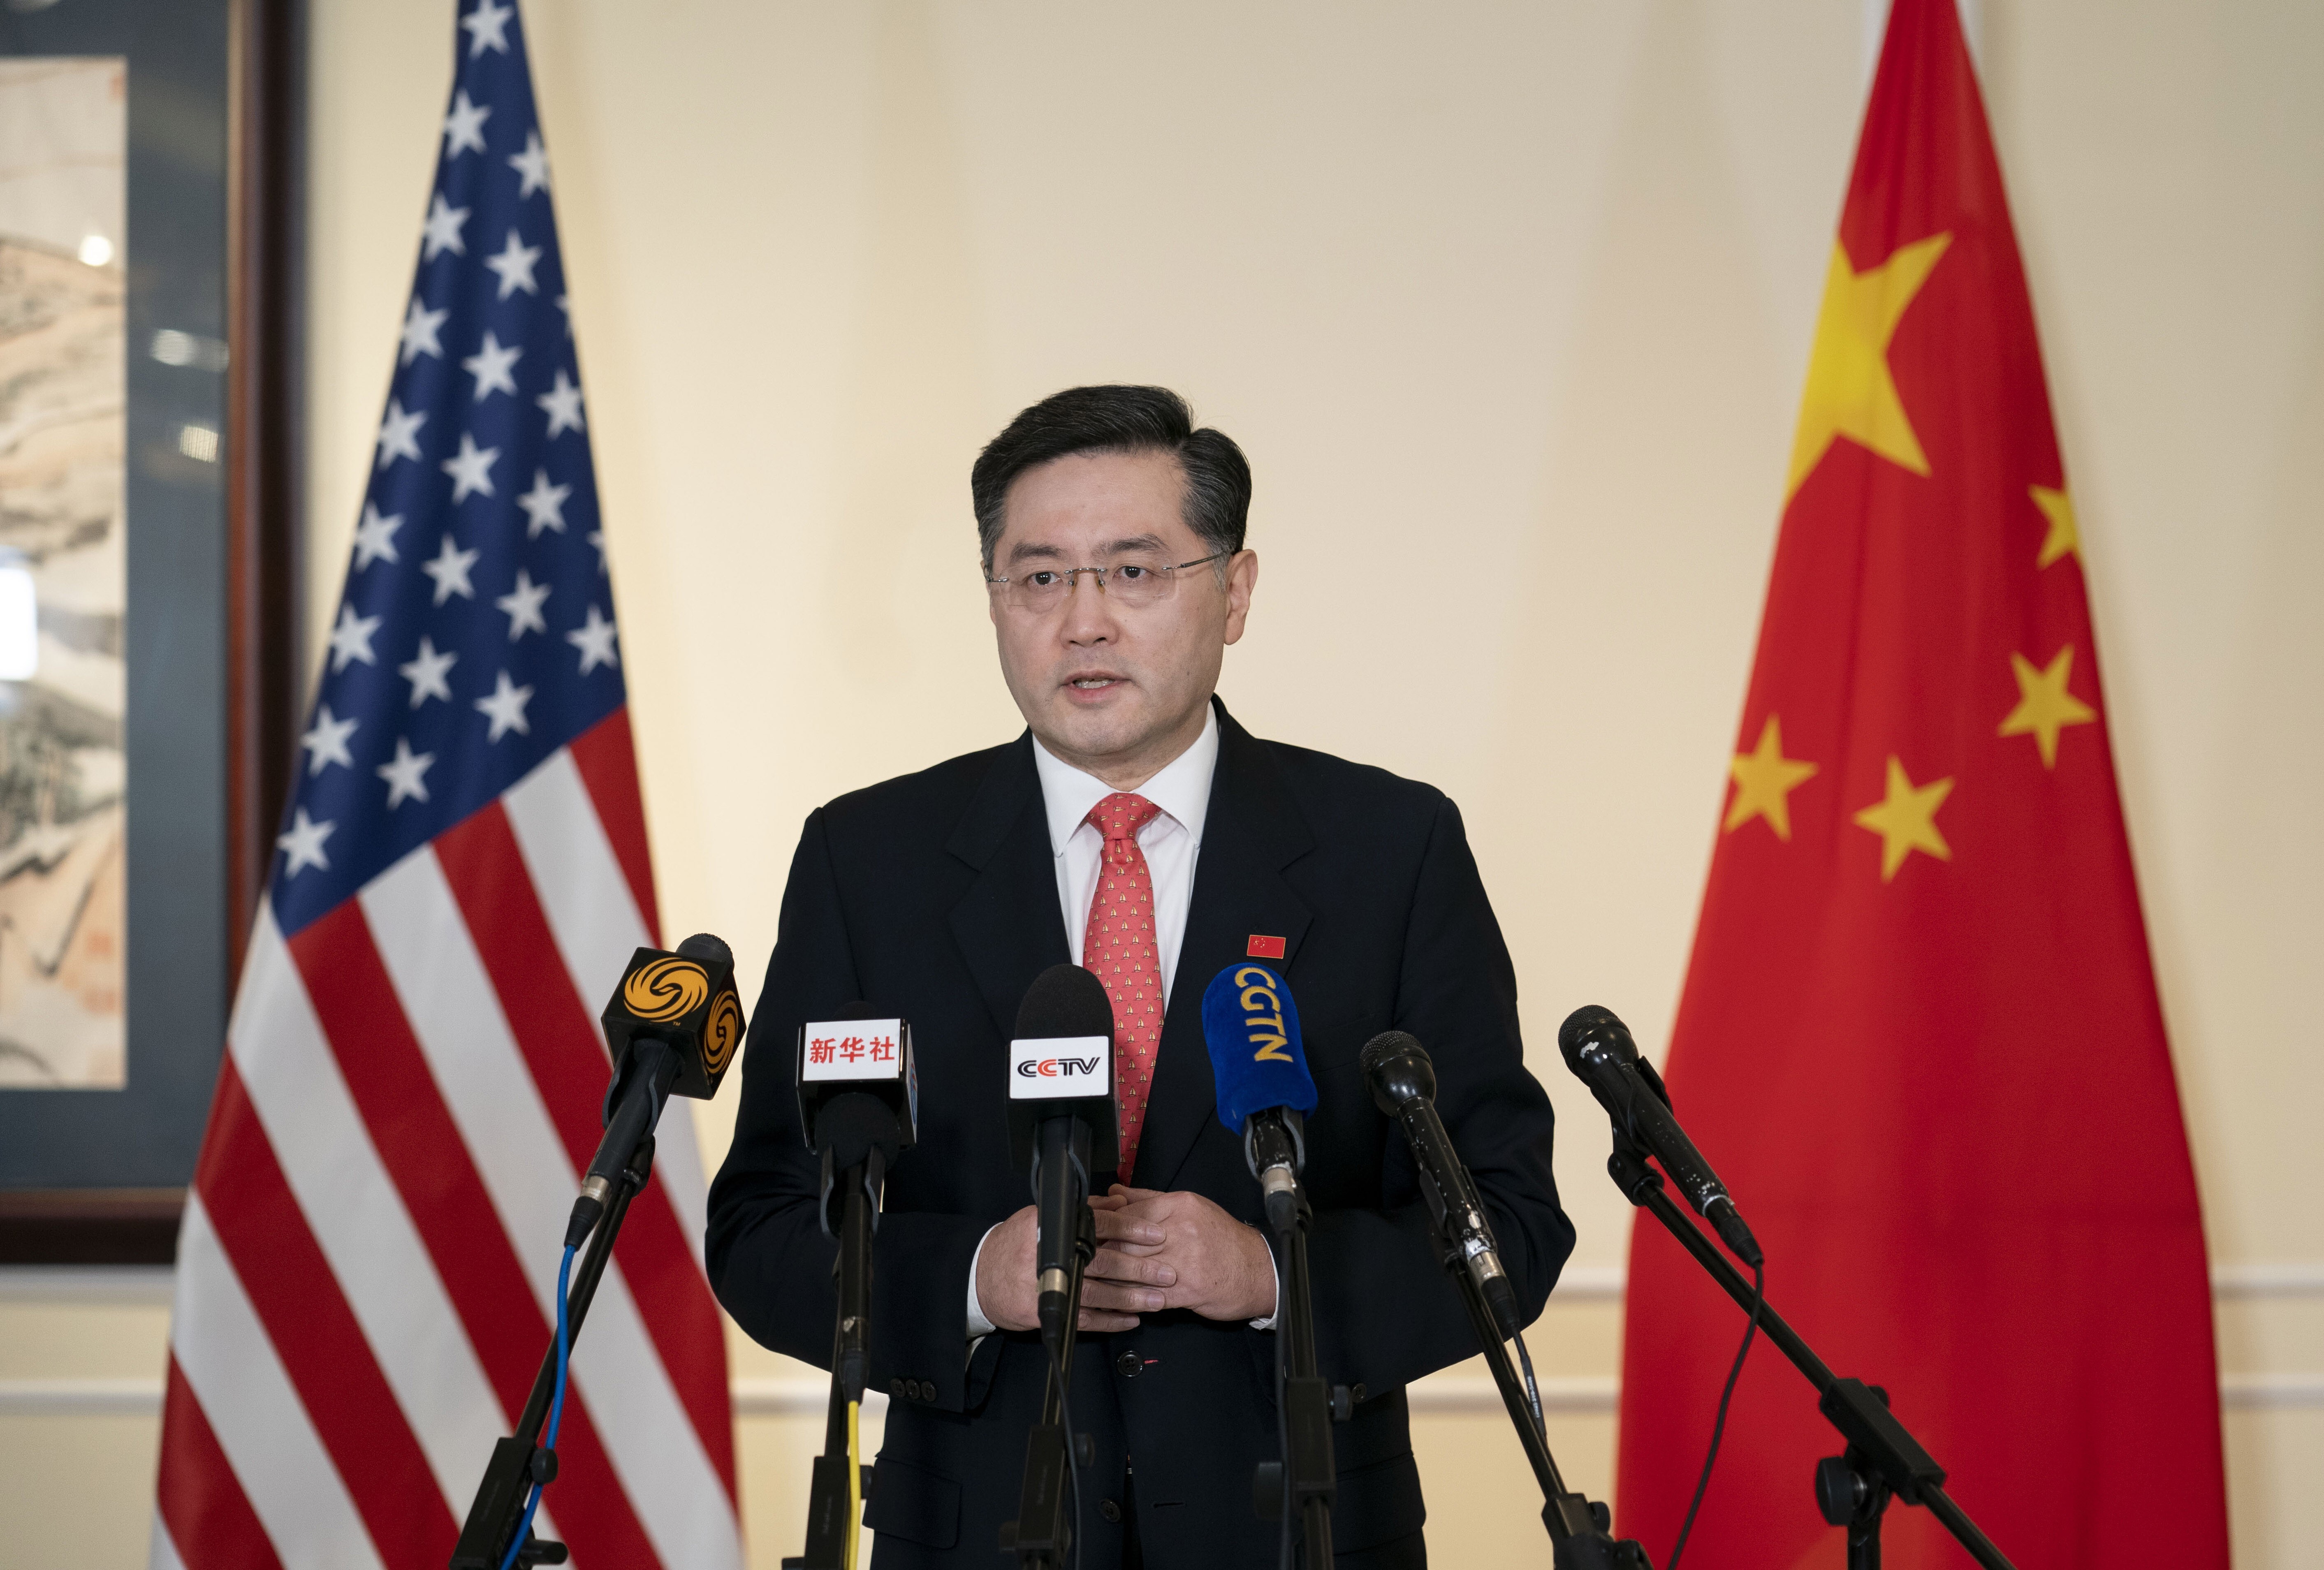 China's ambassador to the United States Qin Gang “stressed that people-to-people relations underpin state-to-state relations”, according to China’s foreign ministry. Photo: Xinhua